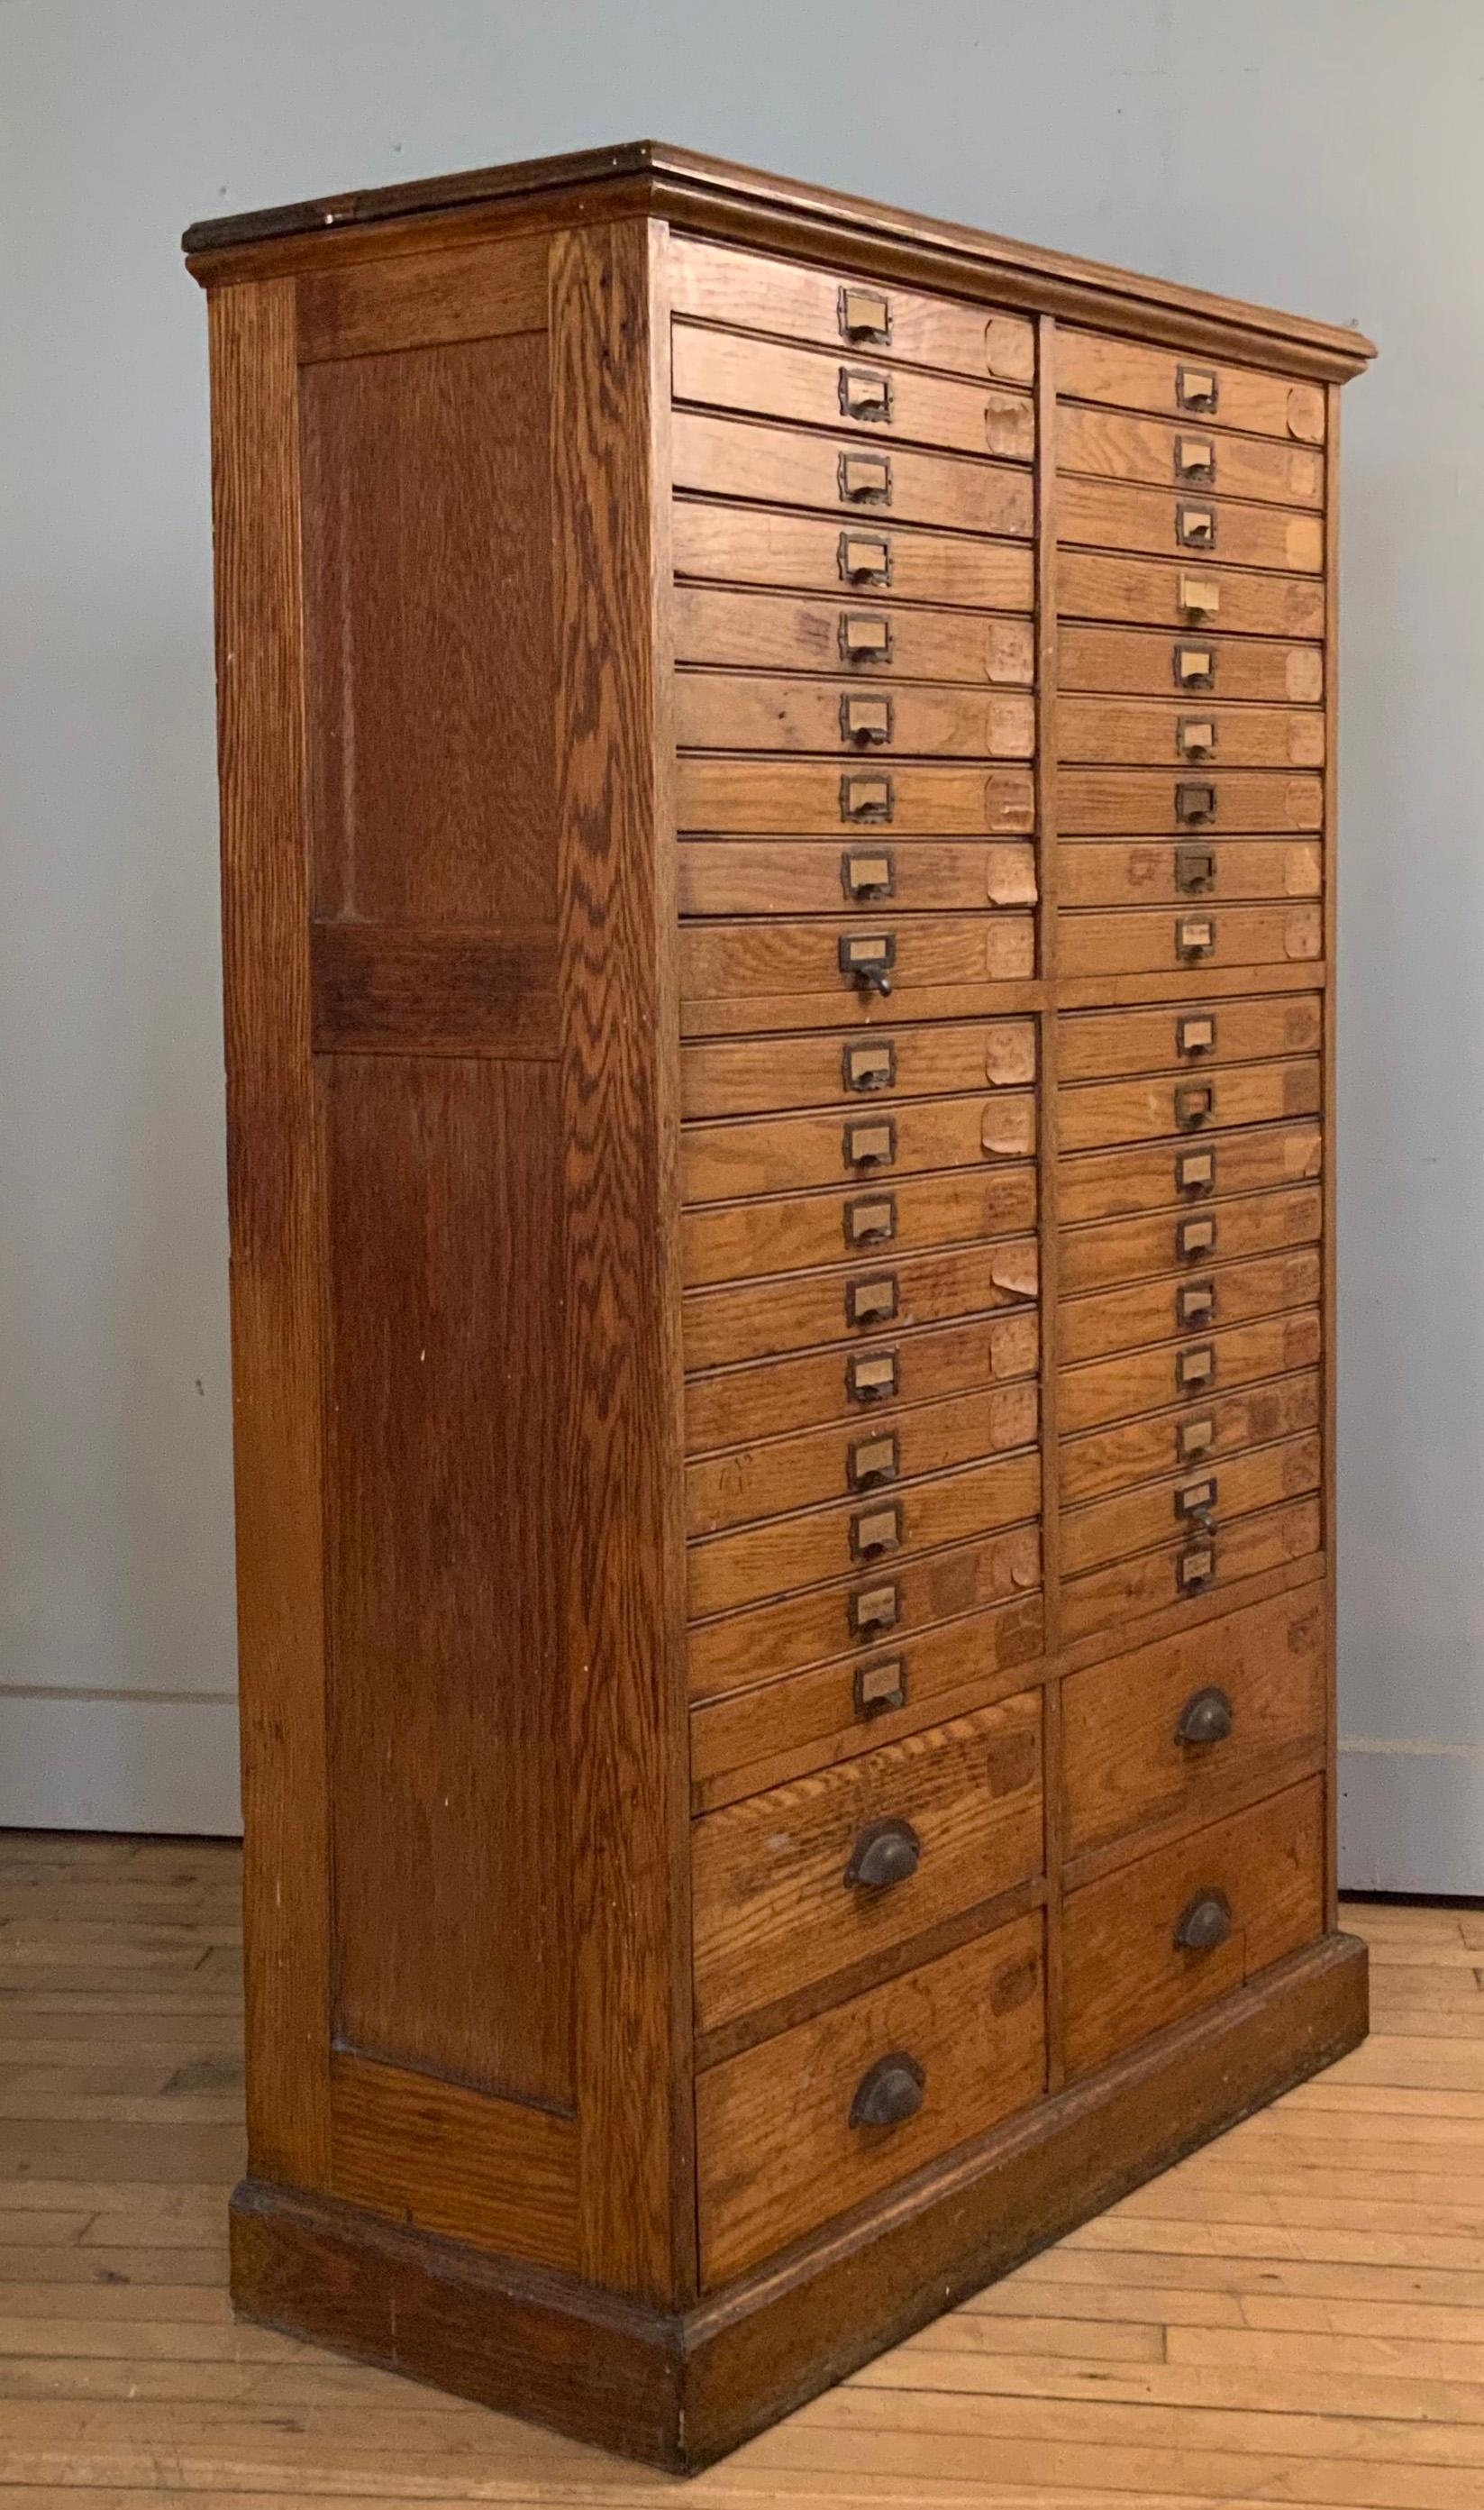 a very handsome antique 1920's oak flat file or printers cabinet. Multi drawer design with 36 slim drawers all with the original brass drawer pulls, and 4 larger drawers at the base for larger items. Perfect storage for a wide variety of objects or